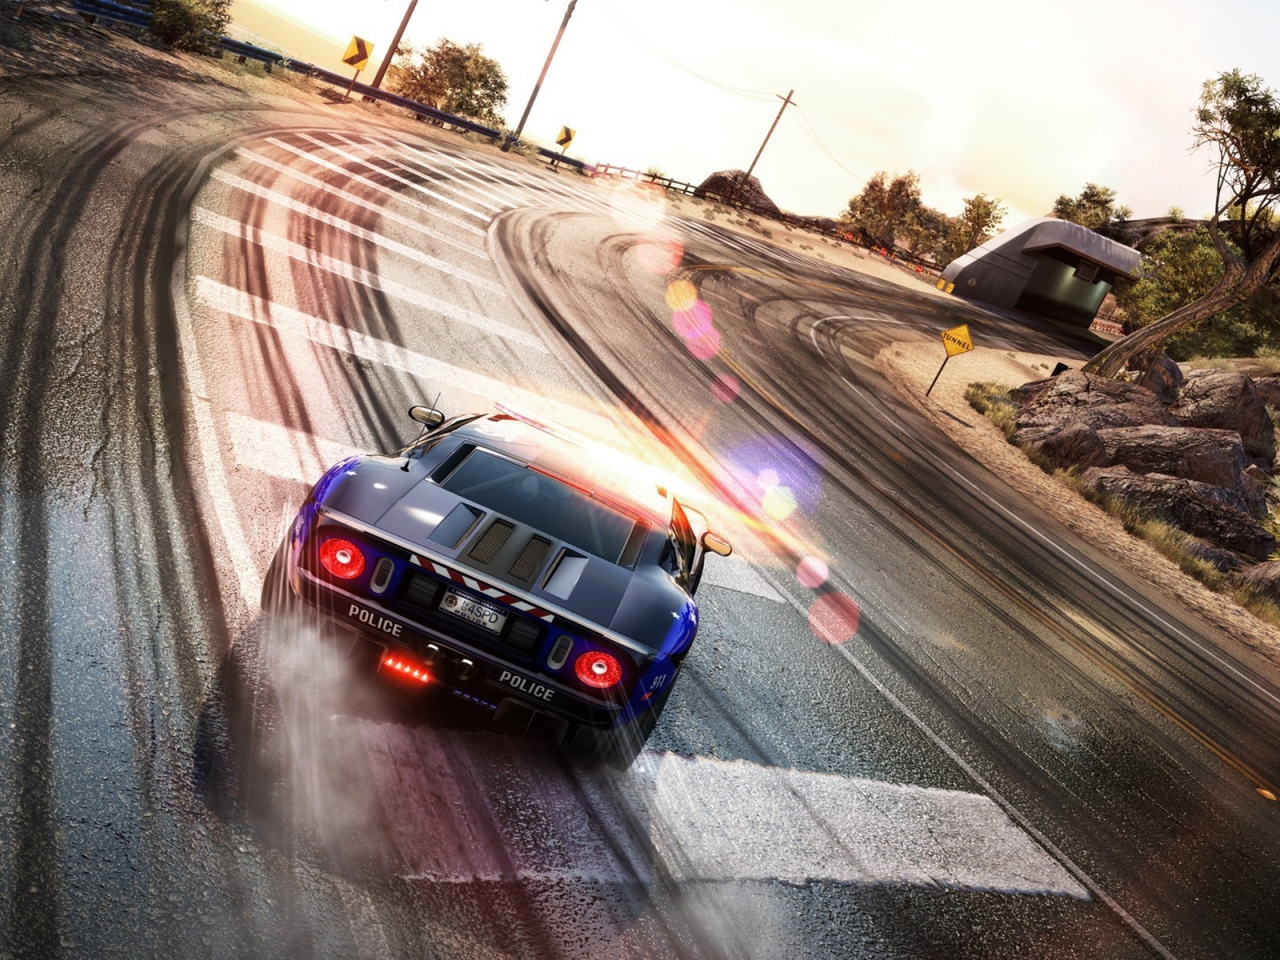 NFS Hot Pursuit for 1280 x 960 resolution